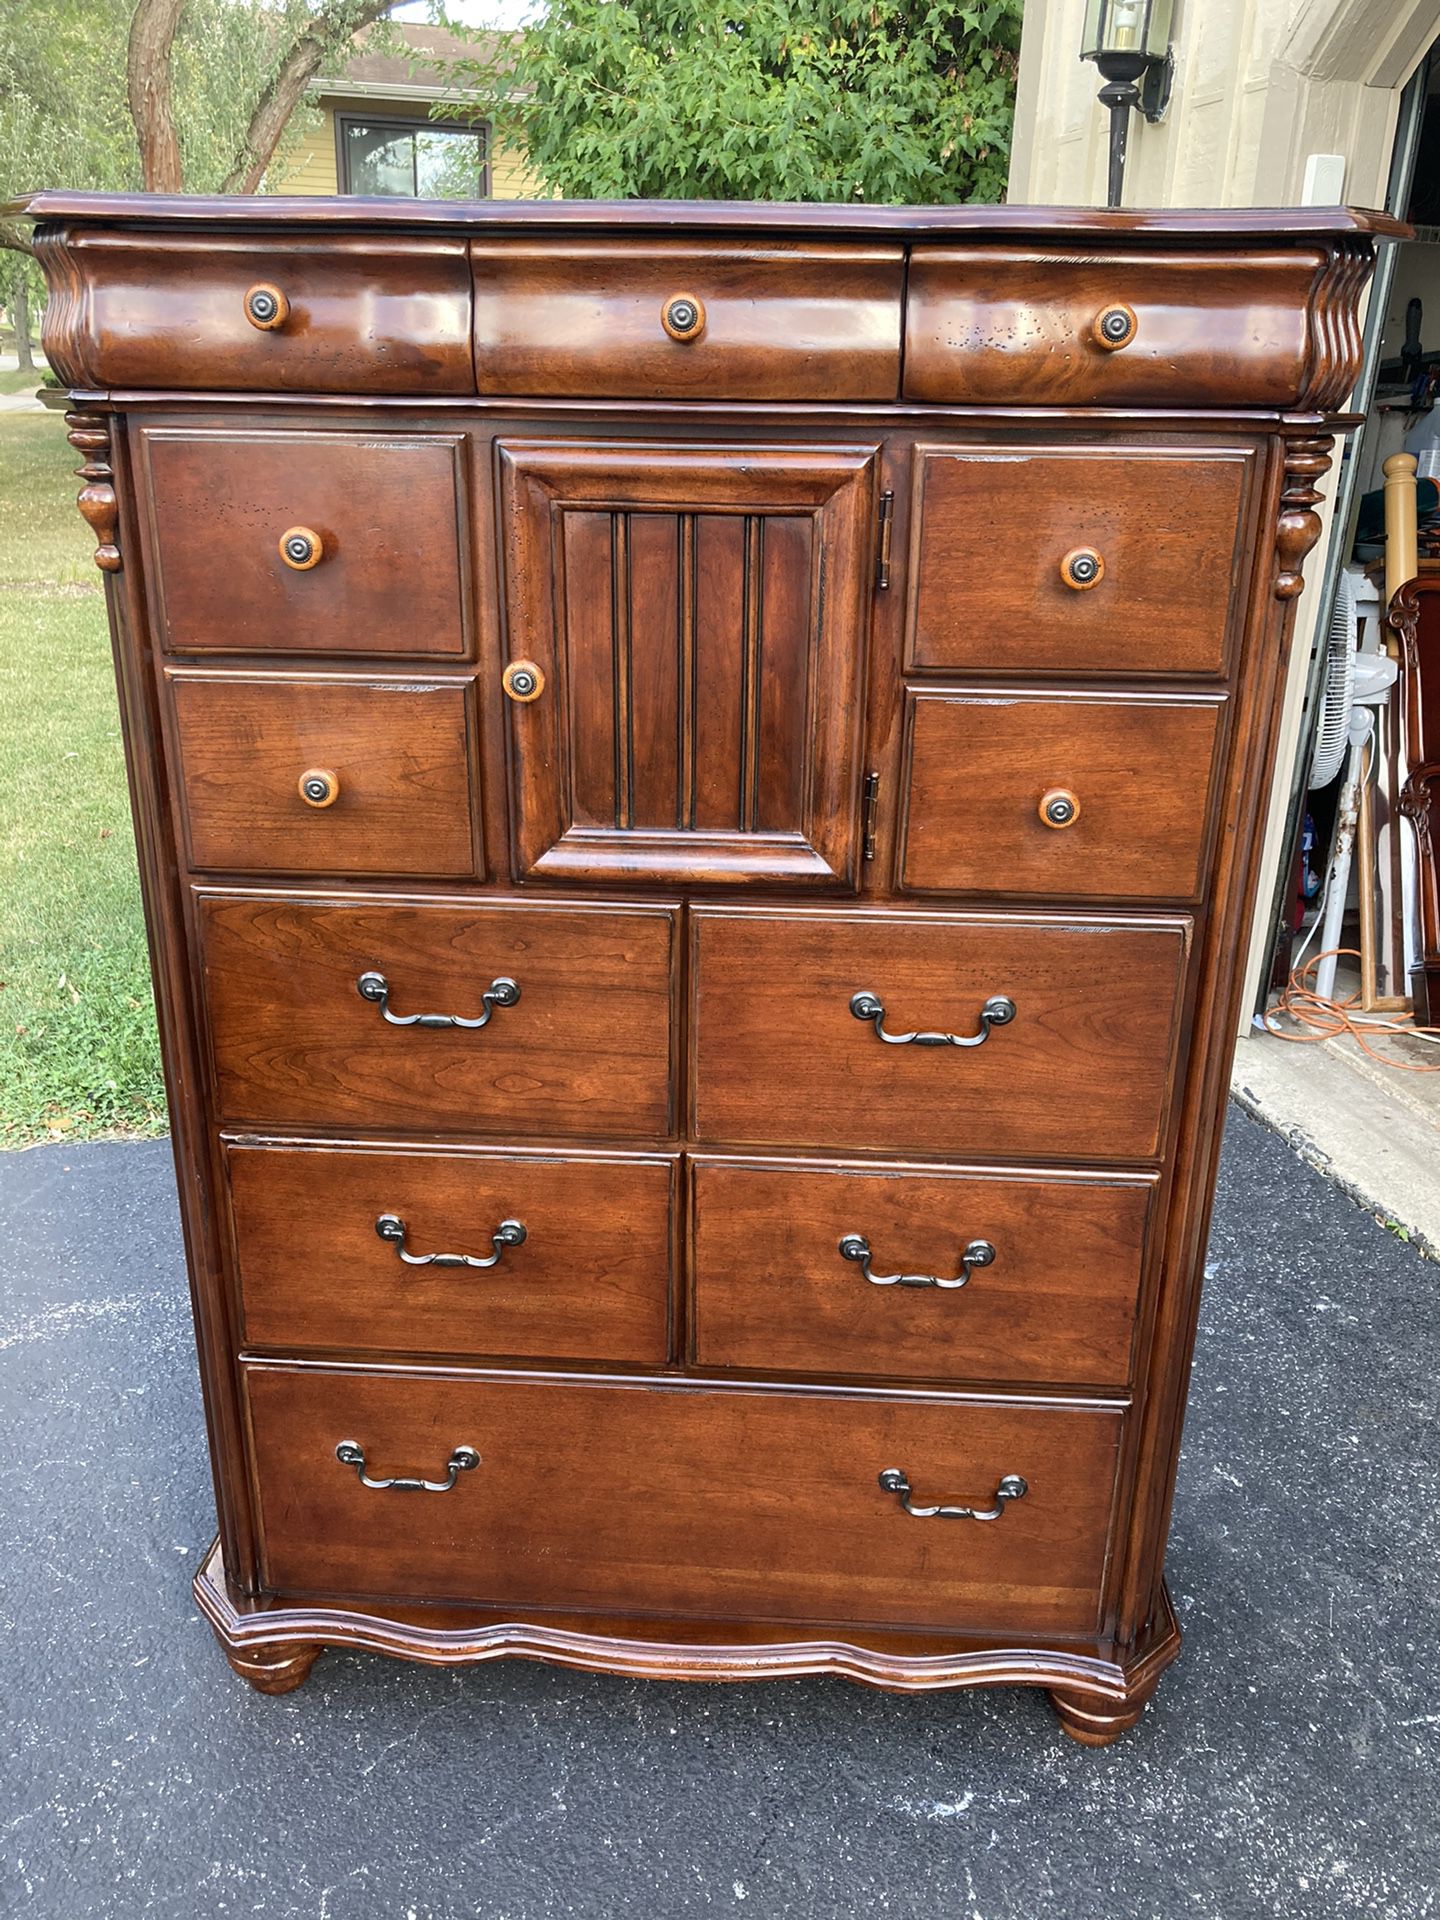 Gorgeous American Signature Dovetailed Wood Dresser Chest